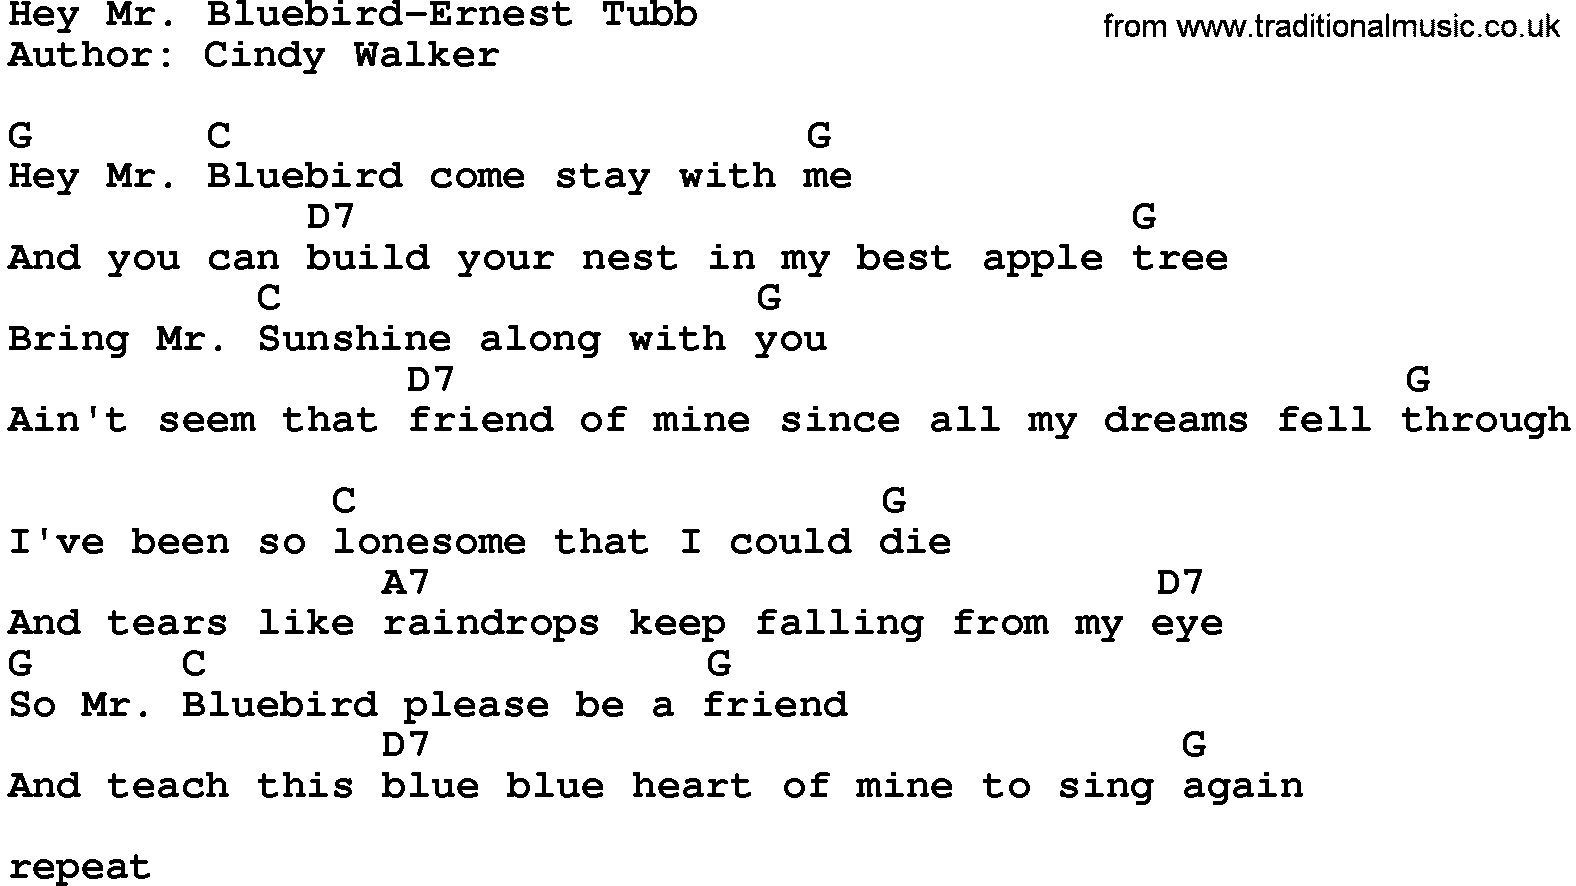 Country music song: Hey Mr Bluebird-Ernest Tubb lyrics and chords